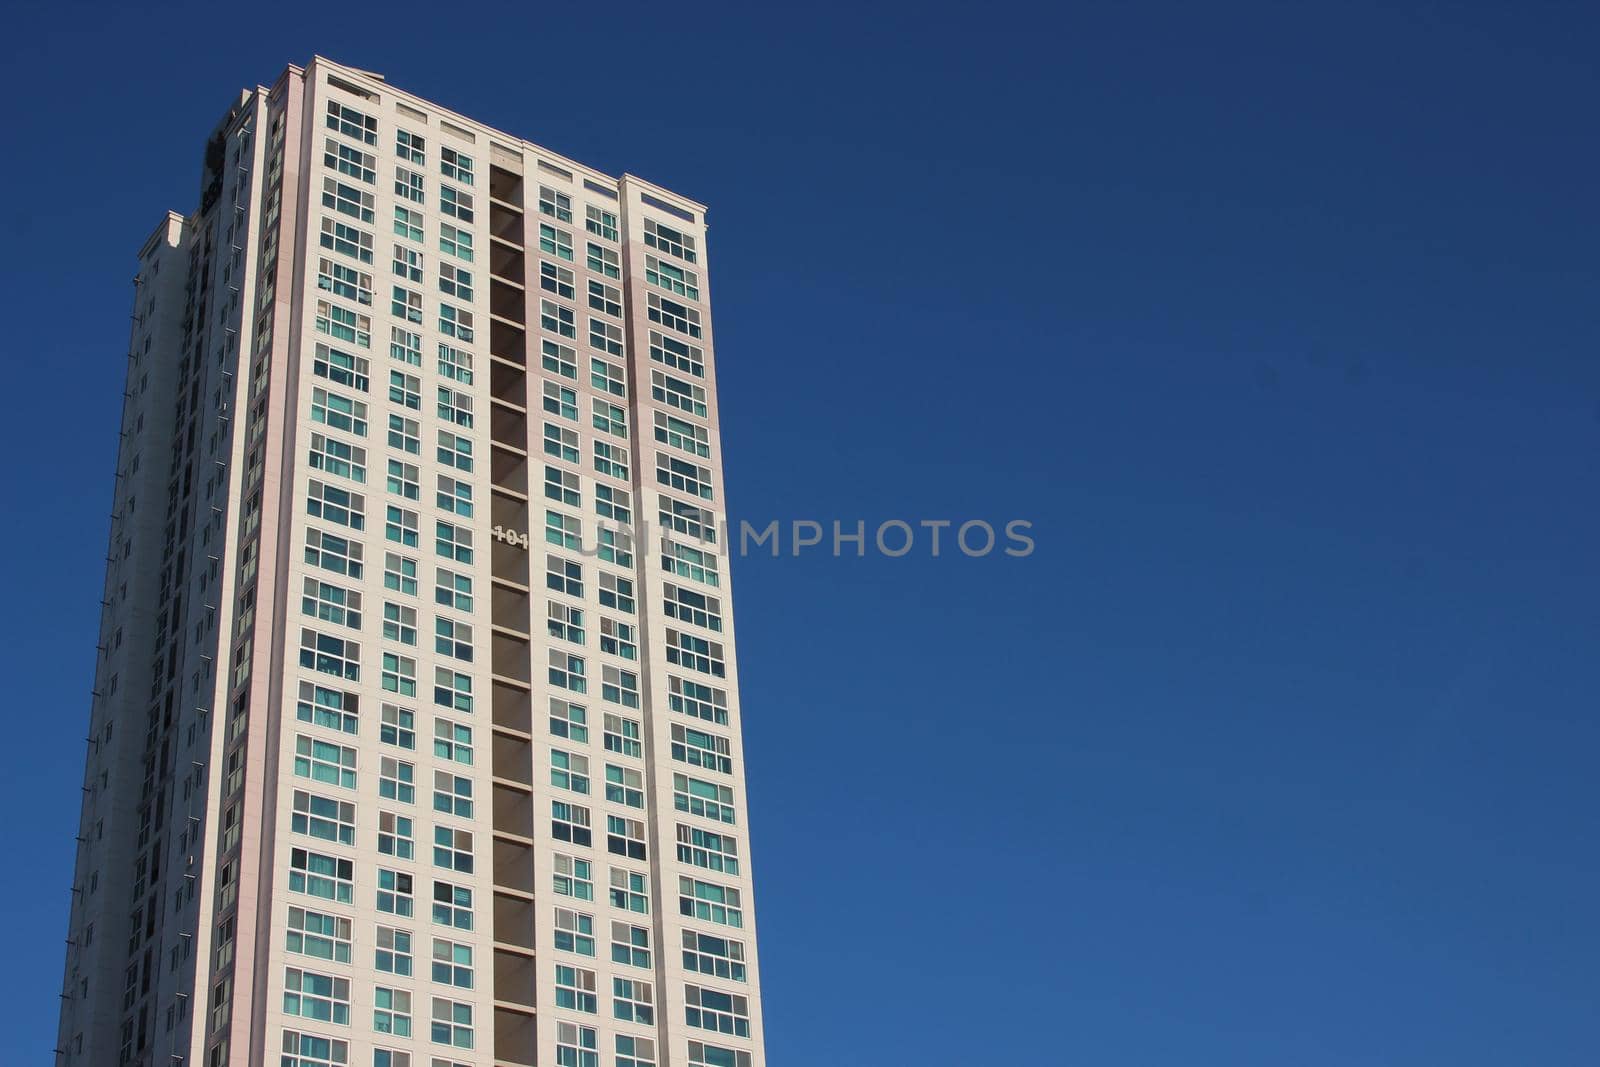 The wide-angle view of a skyscraper commercial building with blue sky on sunny day.